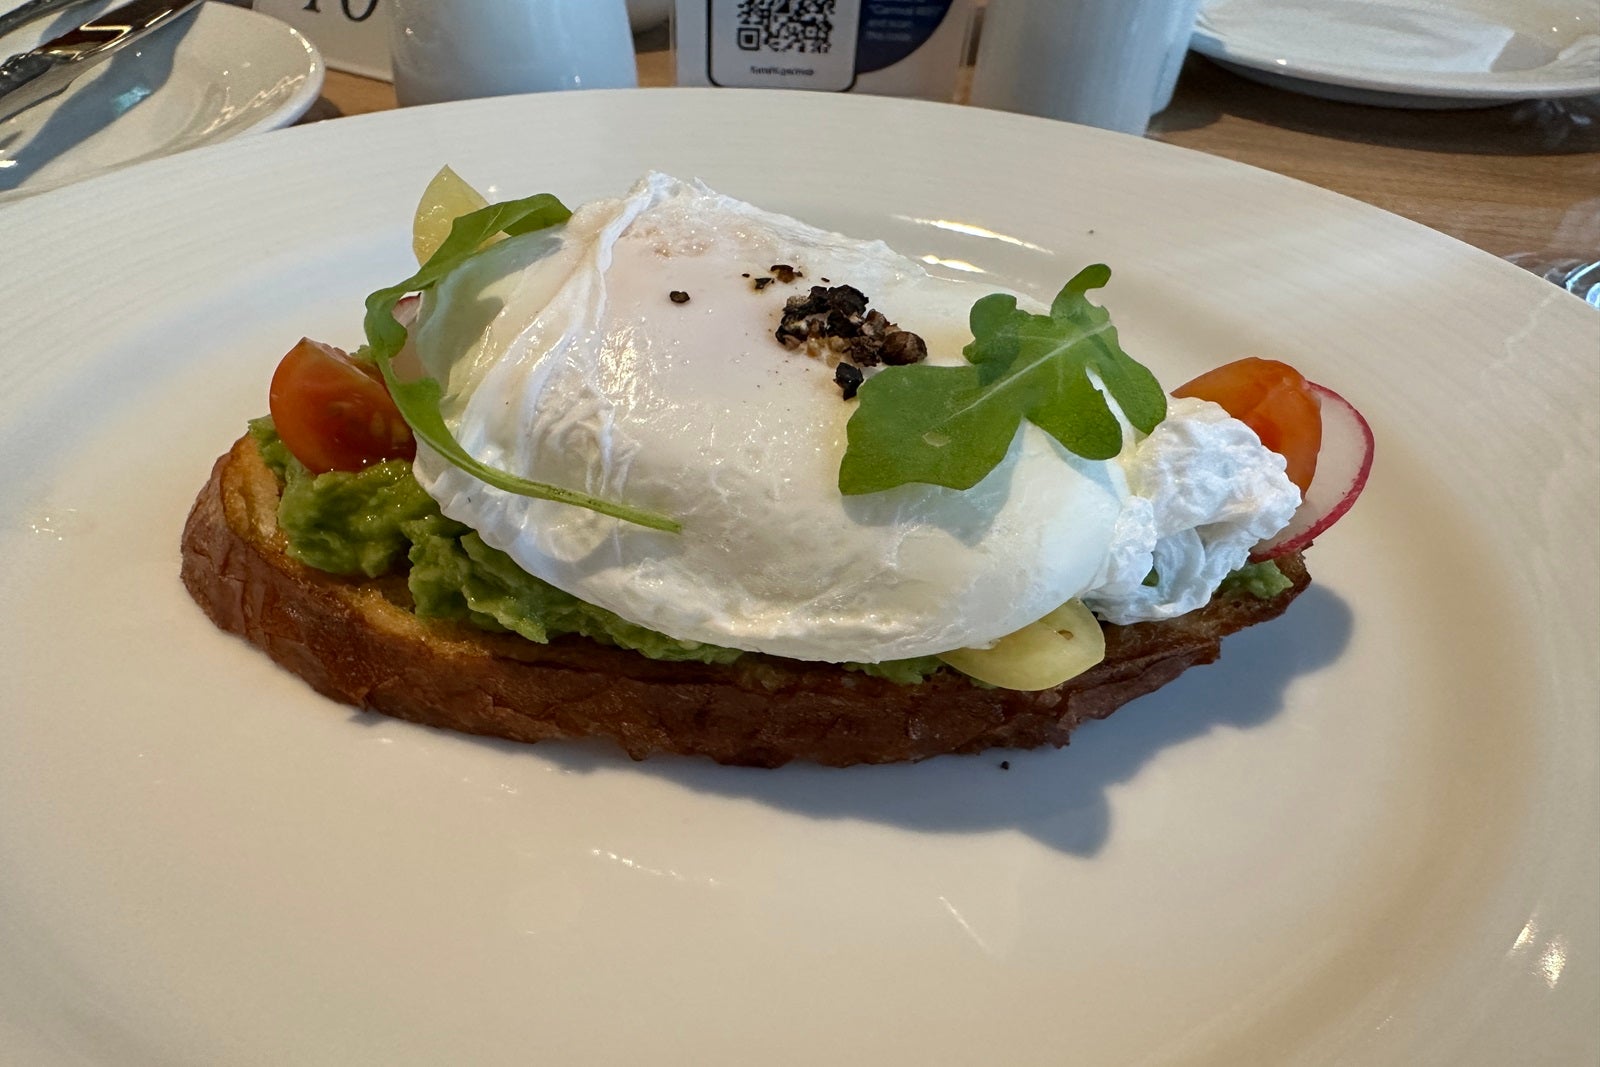 Avocado toast topped with a poached egg on a white plate